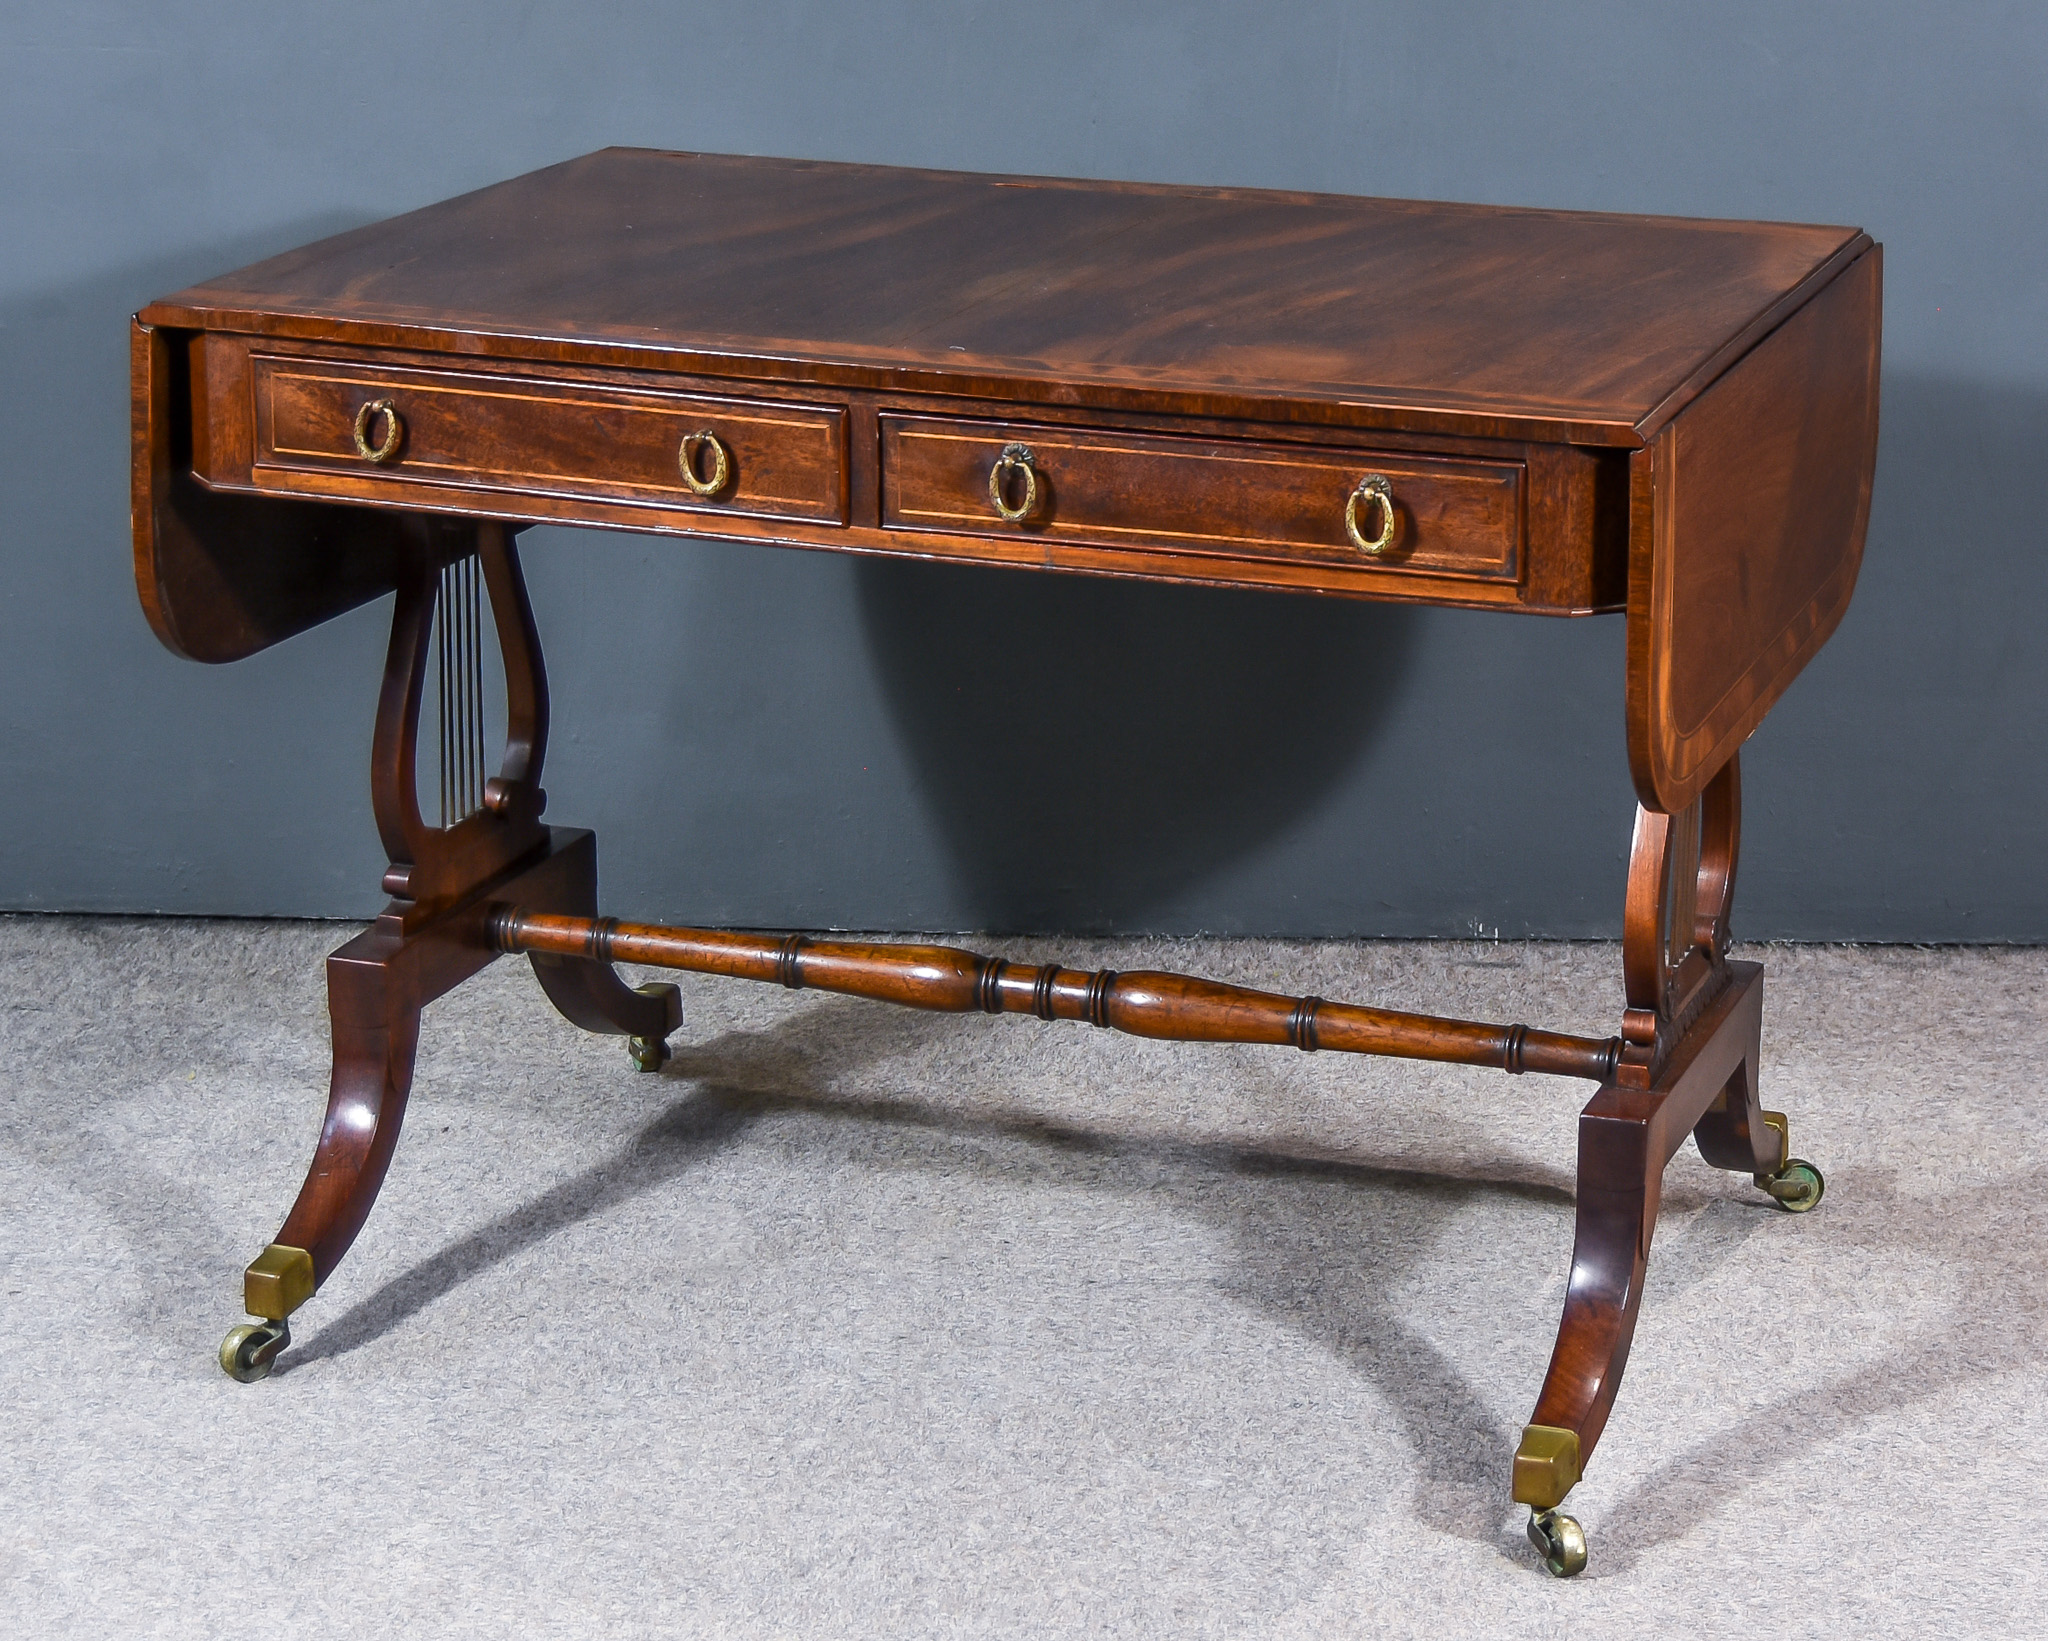 A Mahogany Sofa Table of "Georgian" Design, the top inlaid with bandings, fitted two real and two